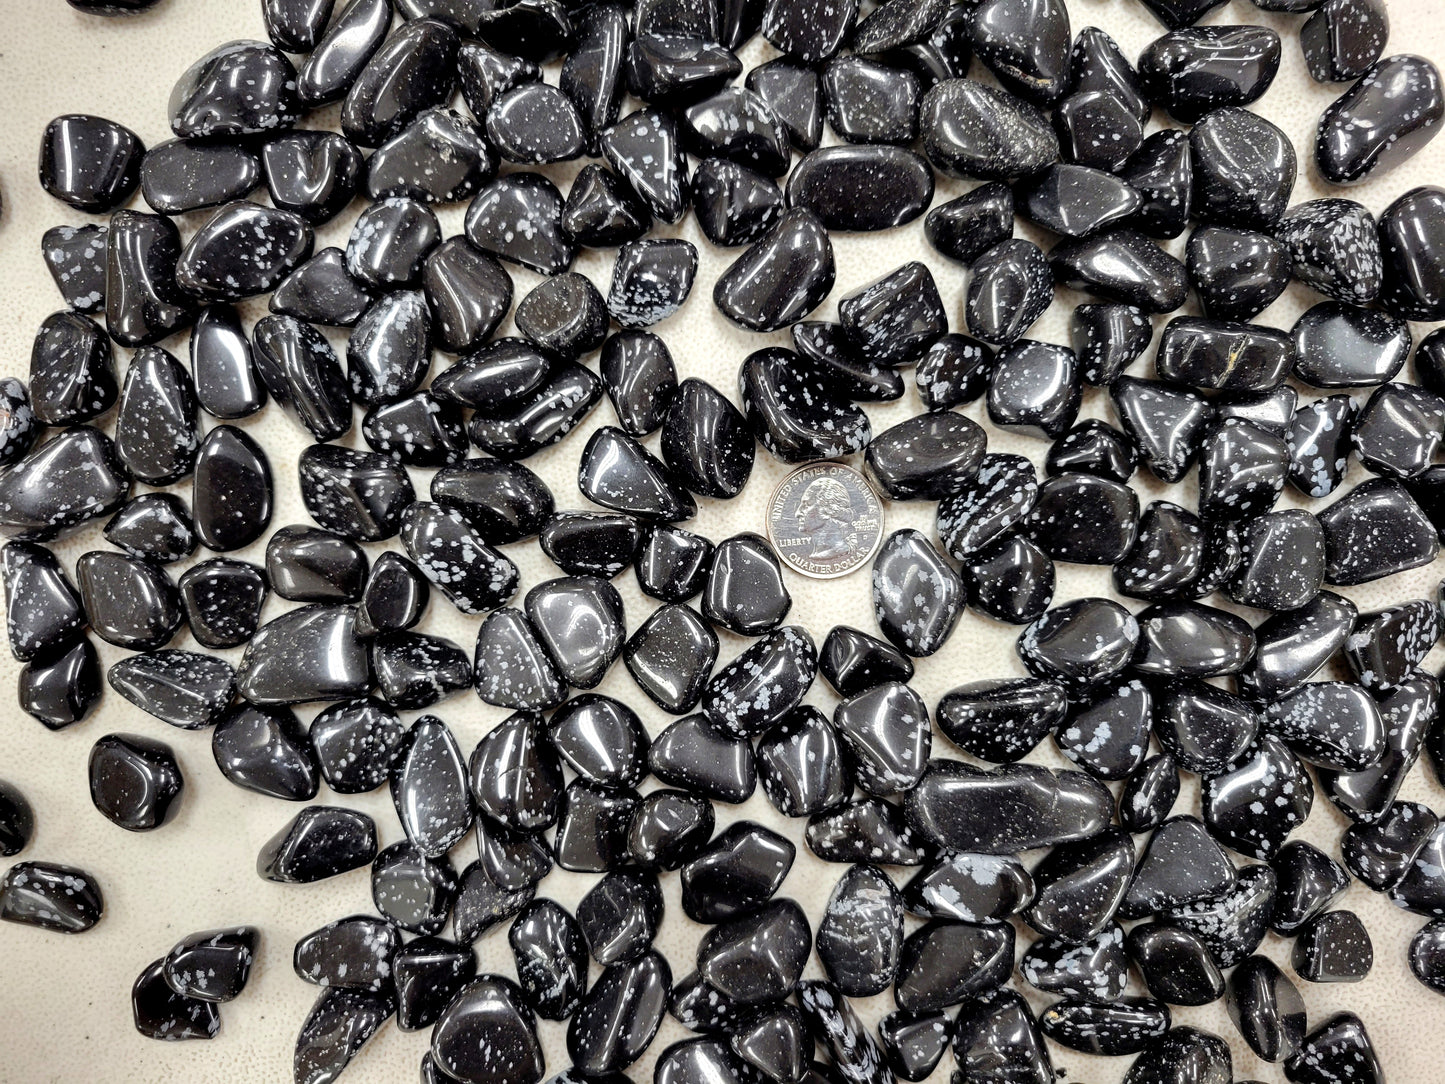 Tumbled Snowflake Obsidian Crystal Stones Bulk - Size Small 1/2 inch to 1 inch